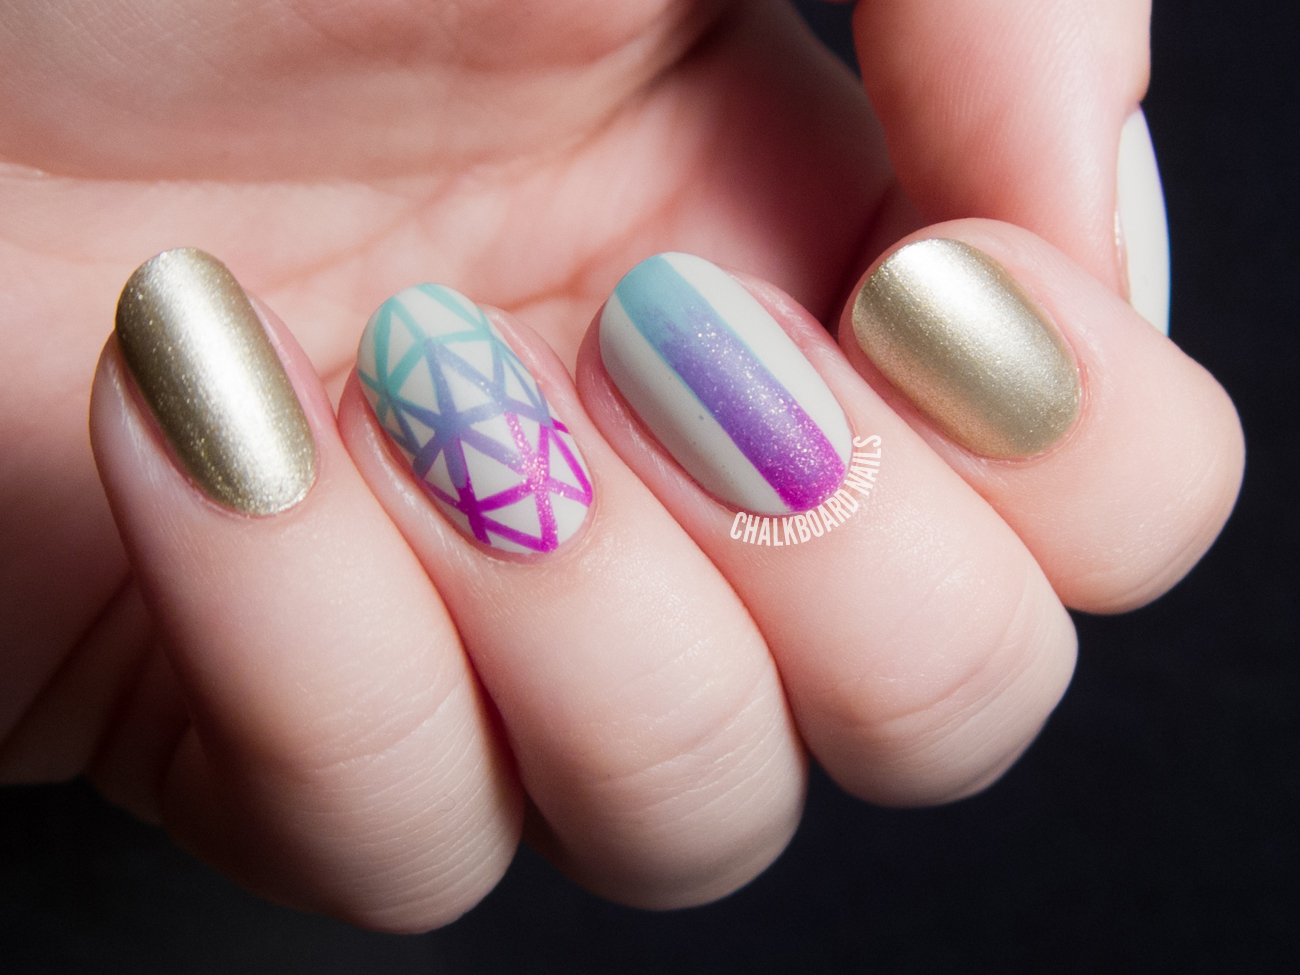 6. Purple and Pink Gradient Nail Art Design on Tumblr - wide 7